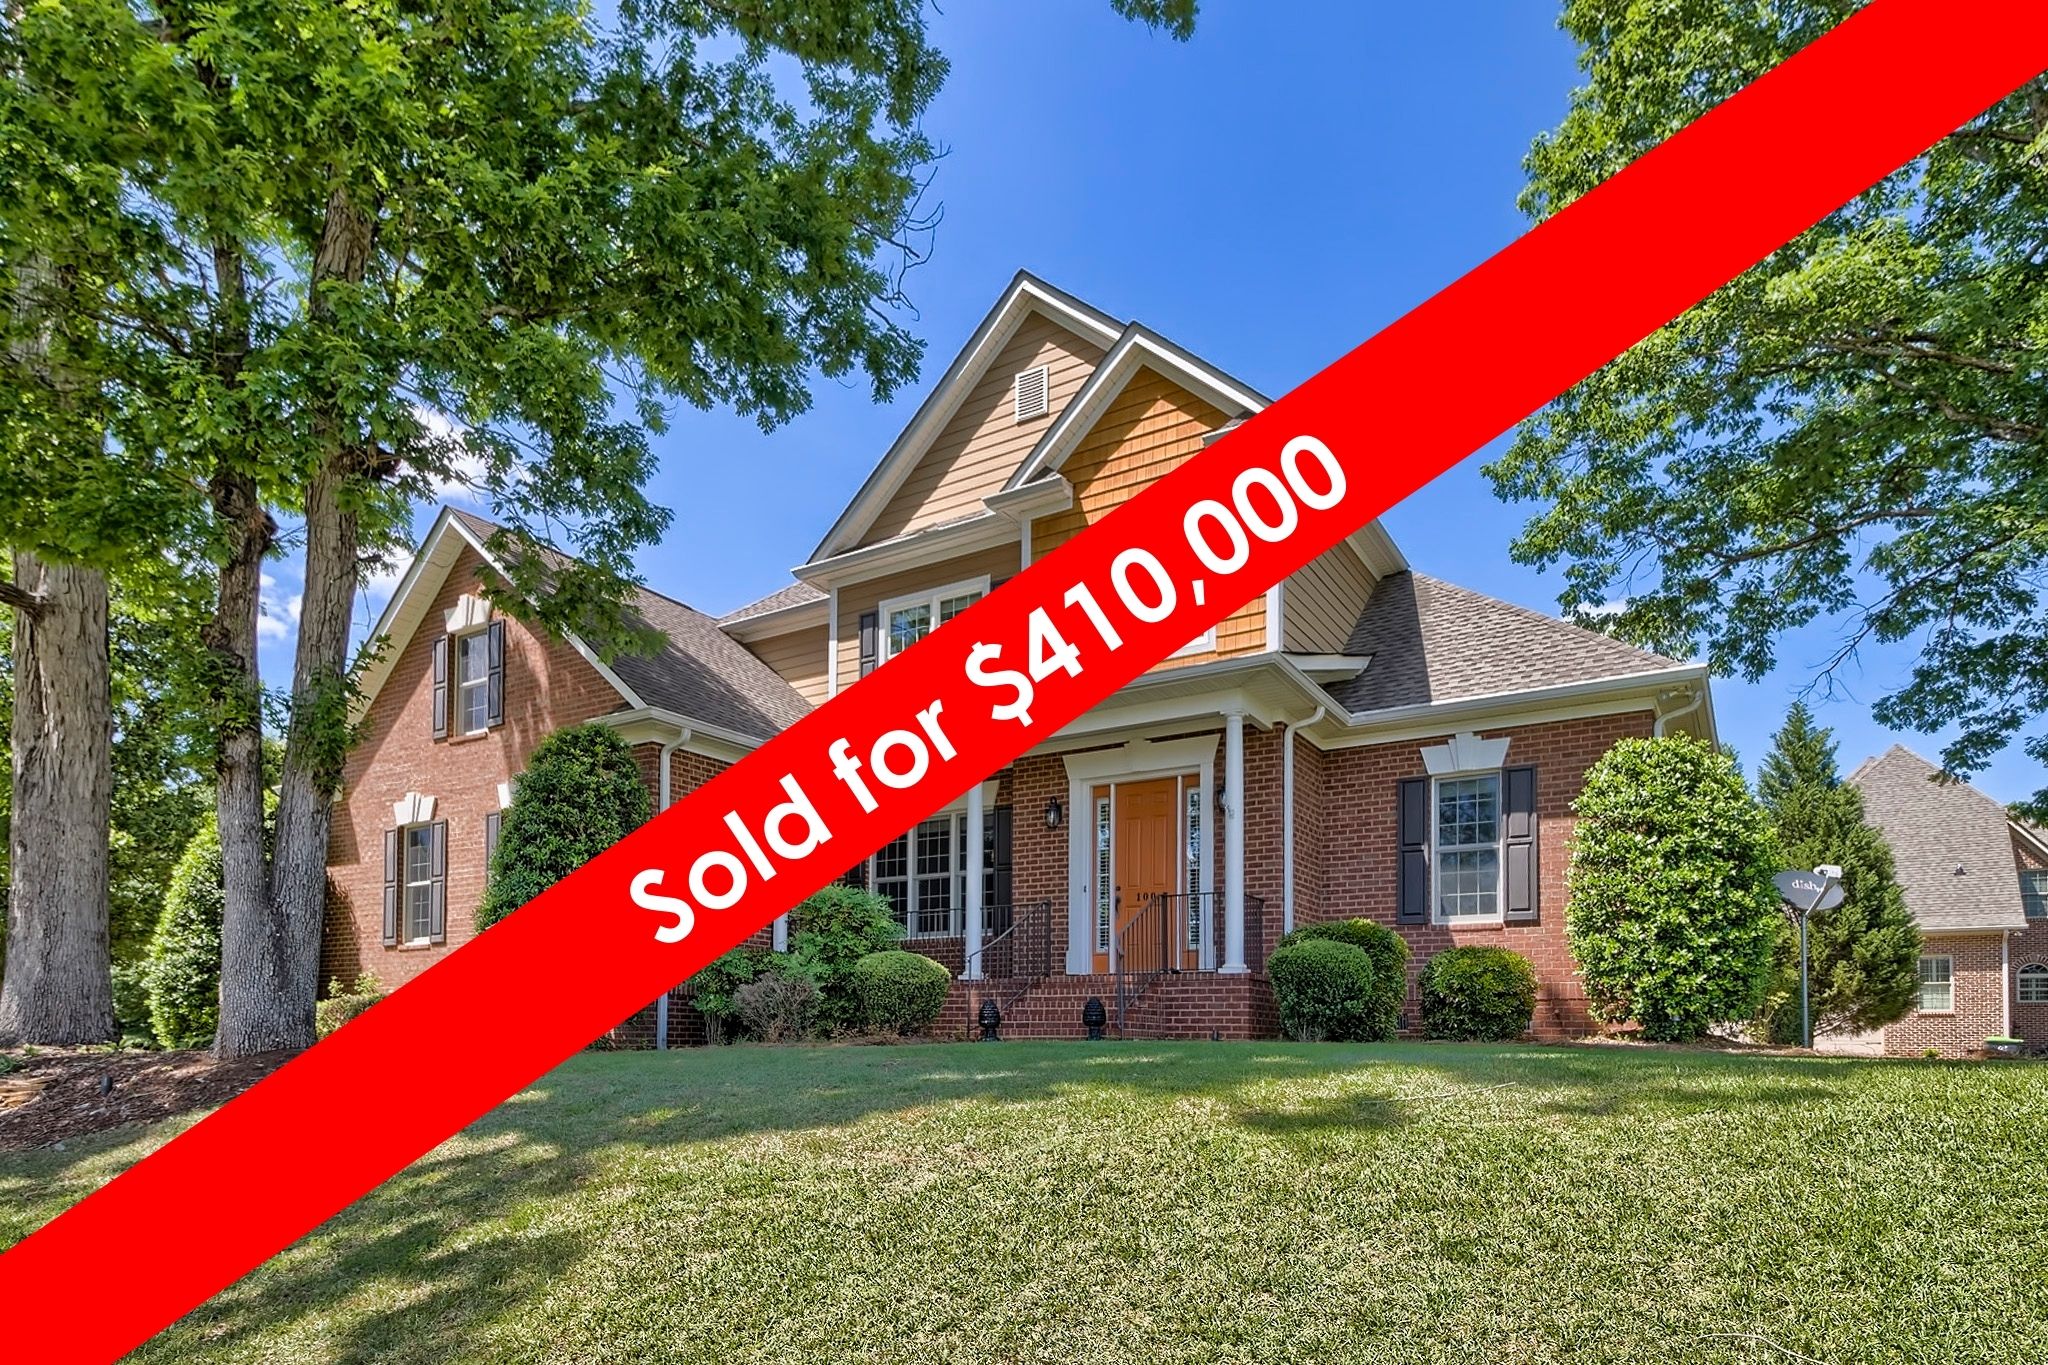 100 Clarmont Court in Lexington sold for $410,000!